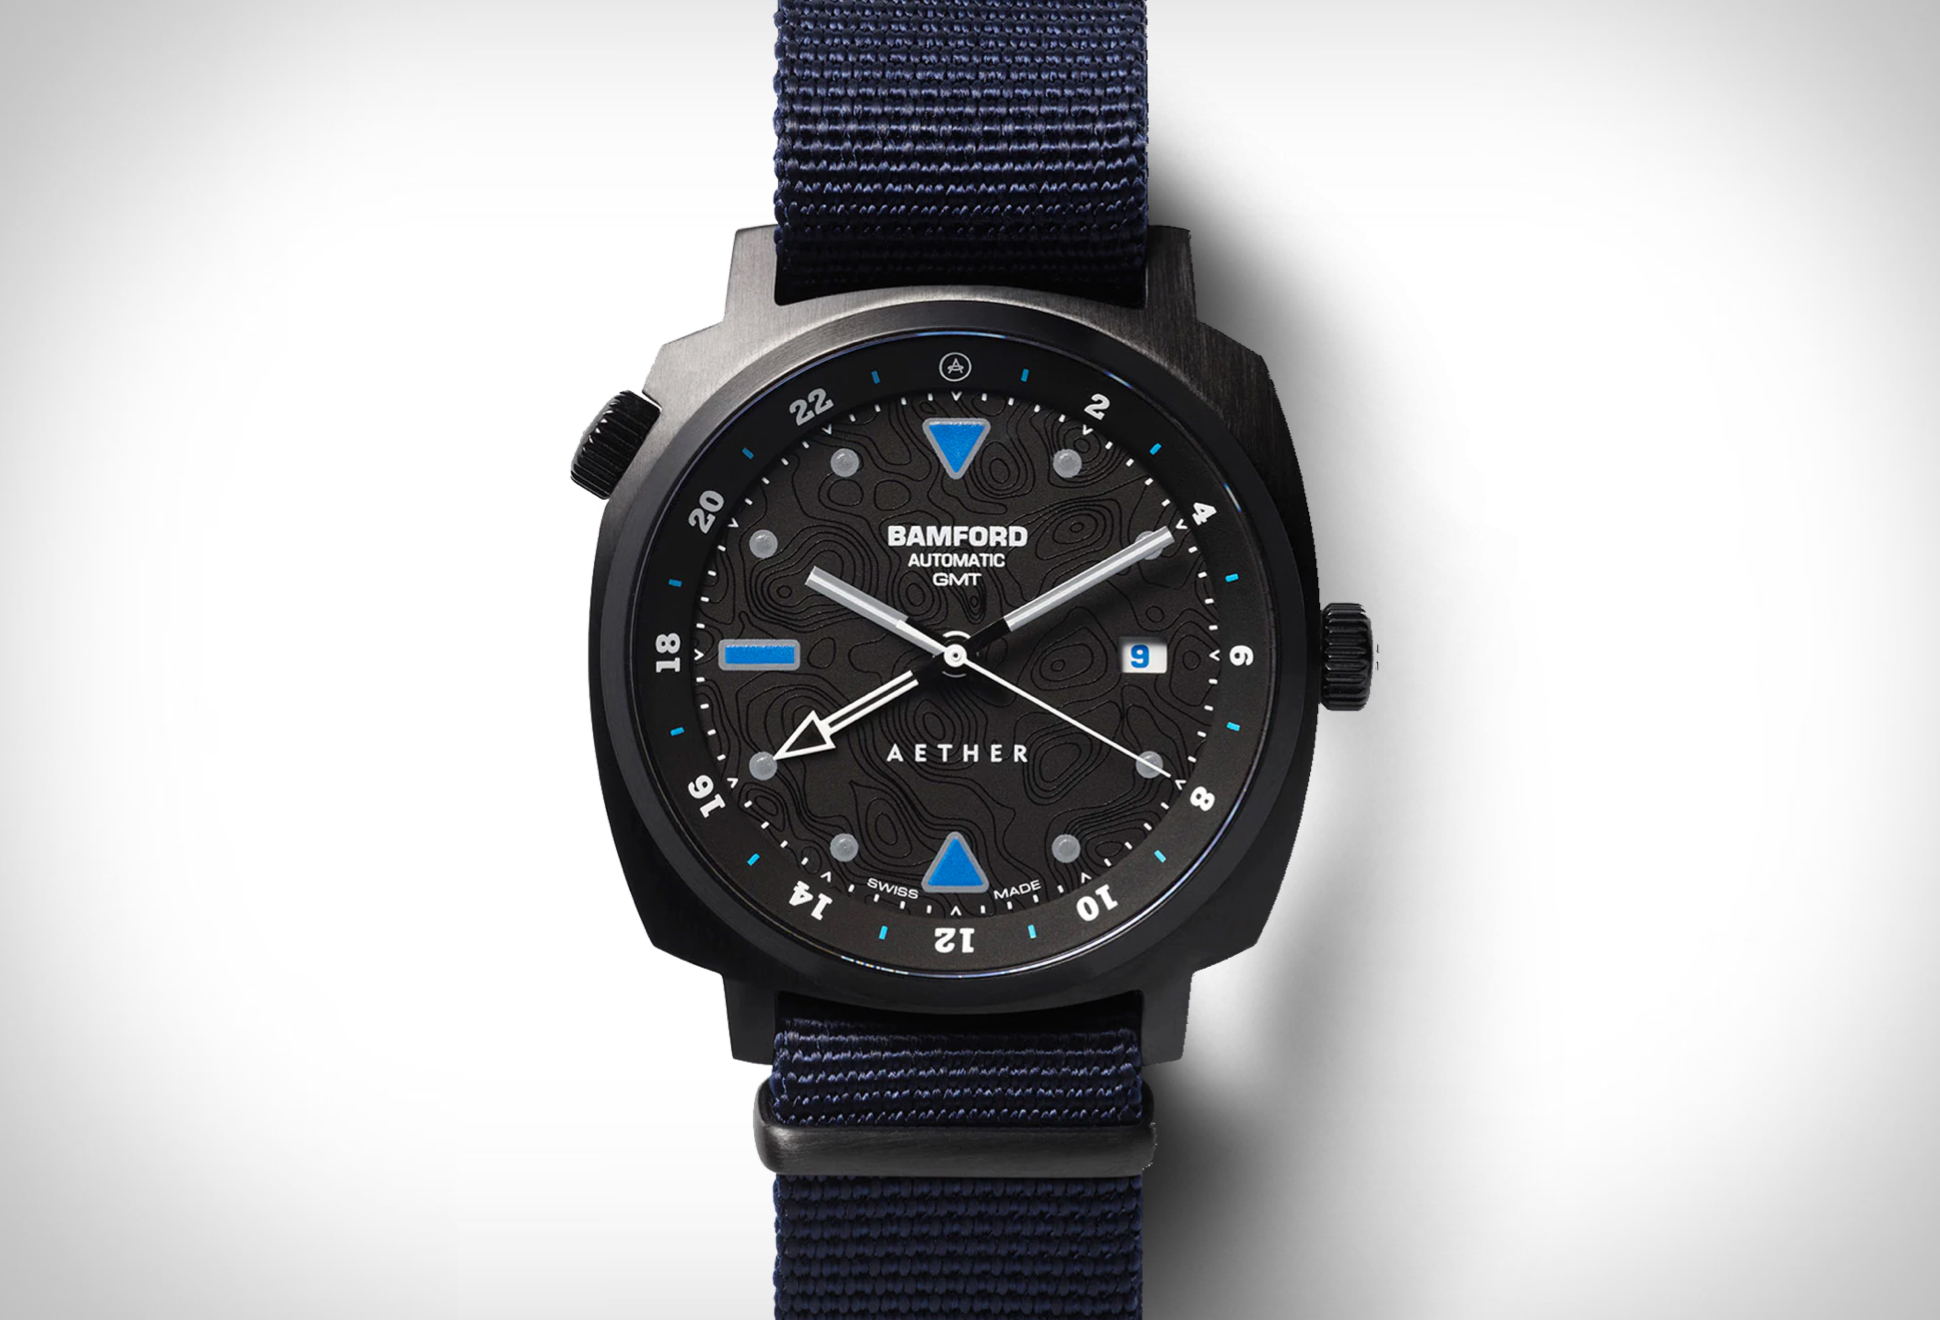 Aether + Bamford GMT Watch | Image